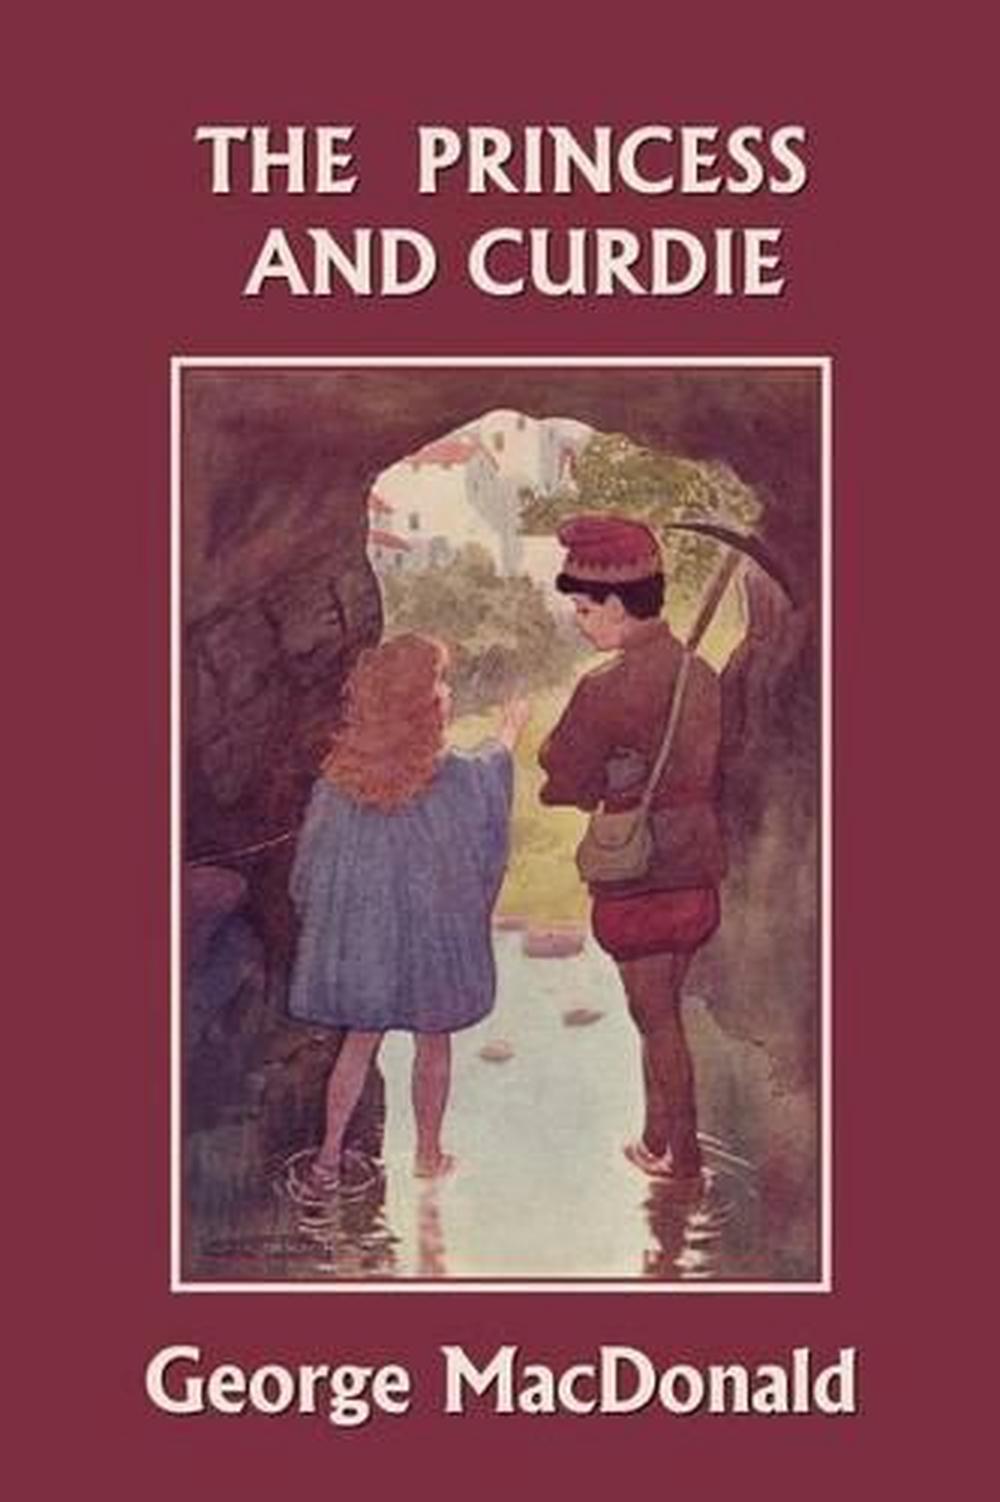 the princess and curdie by george macdonald